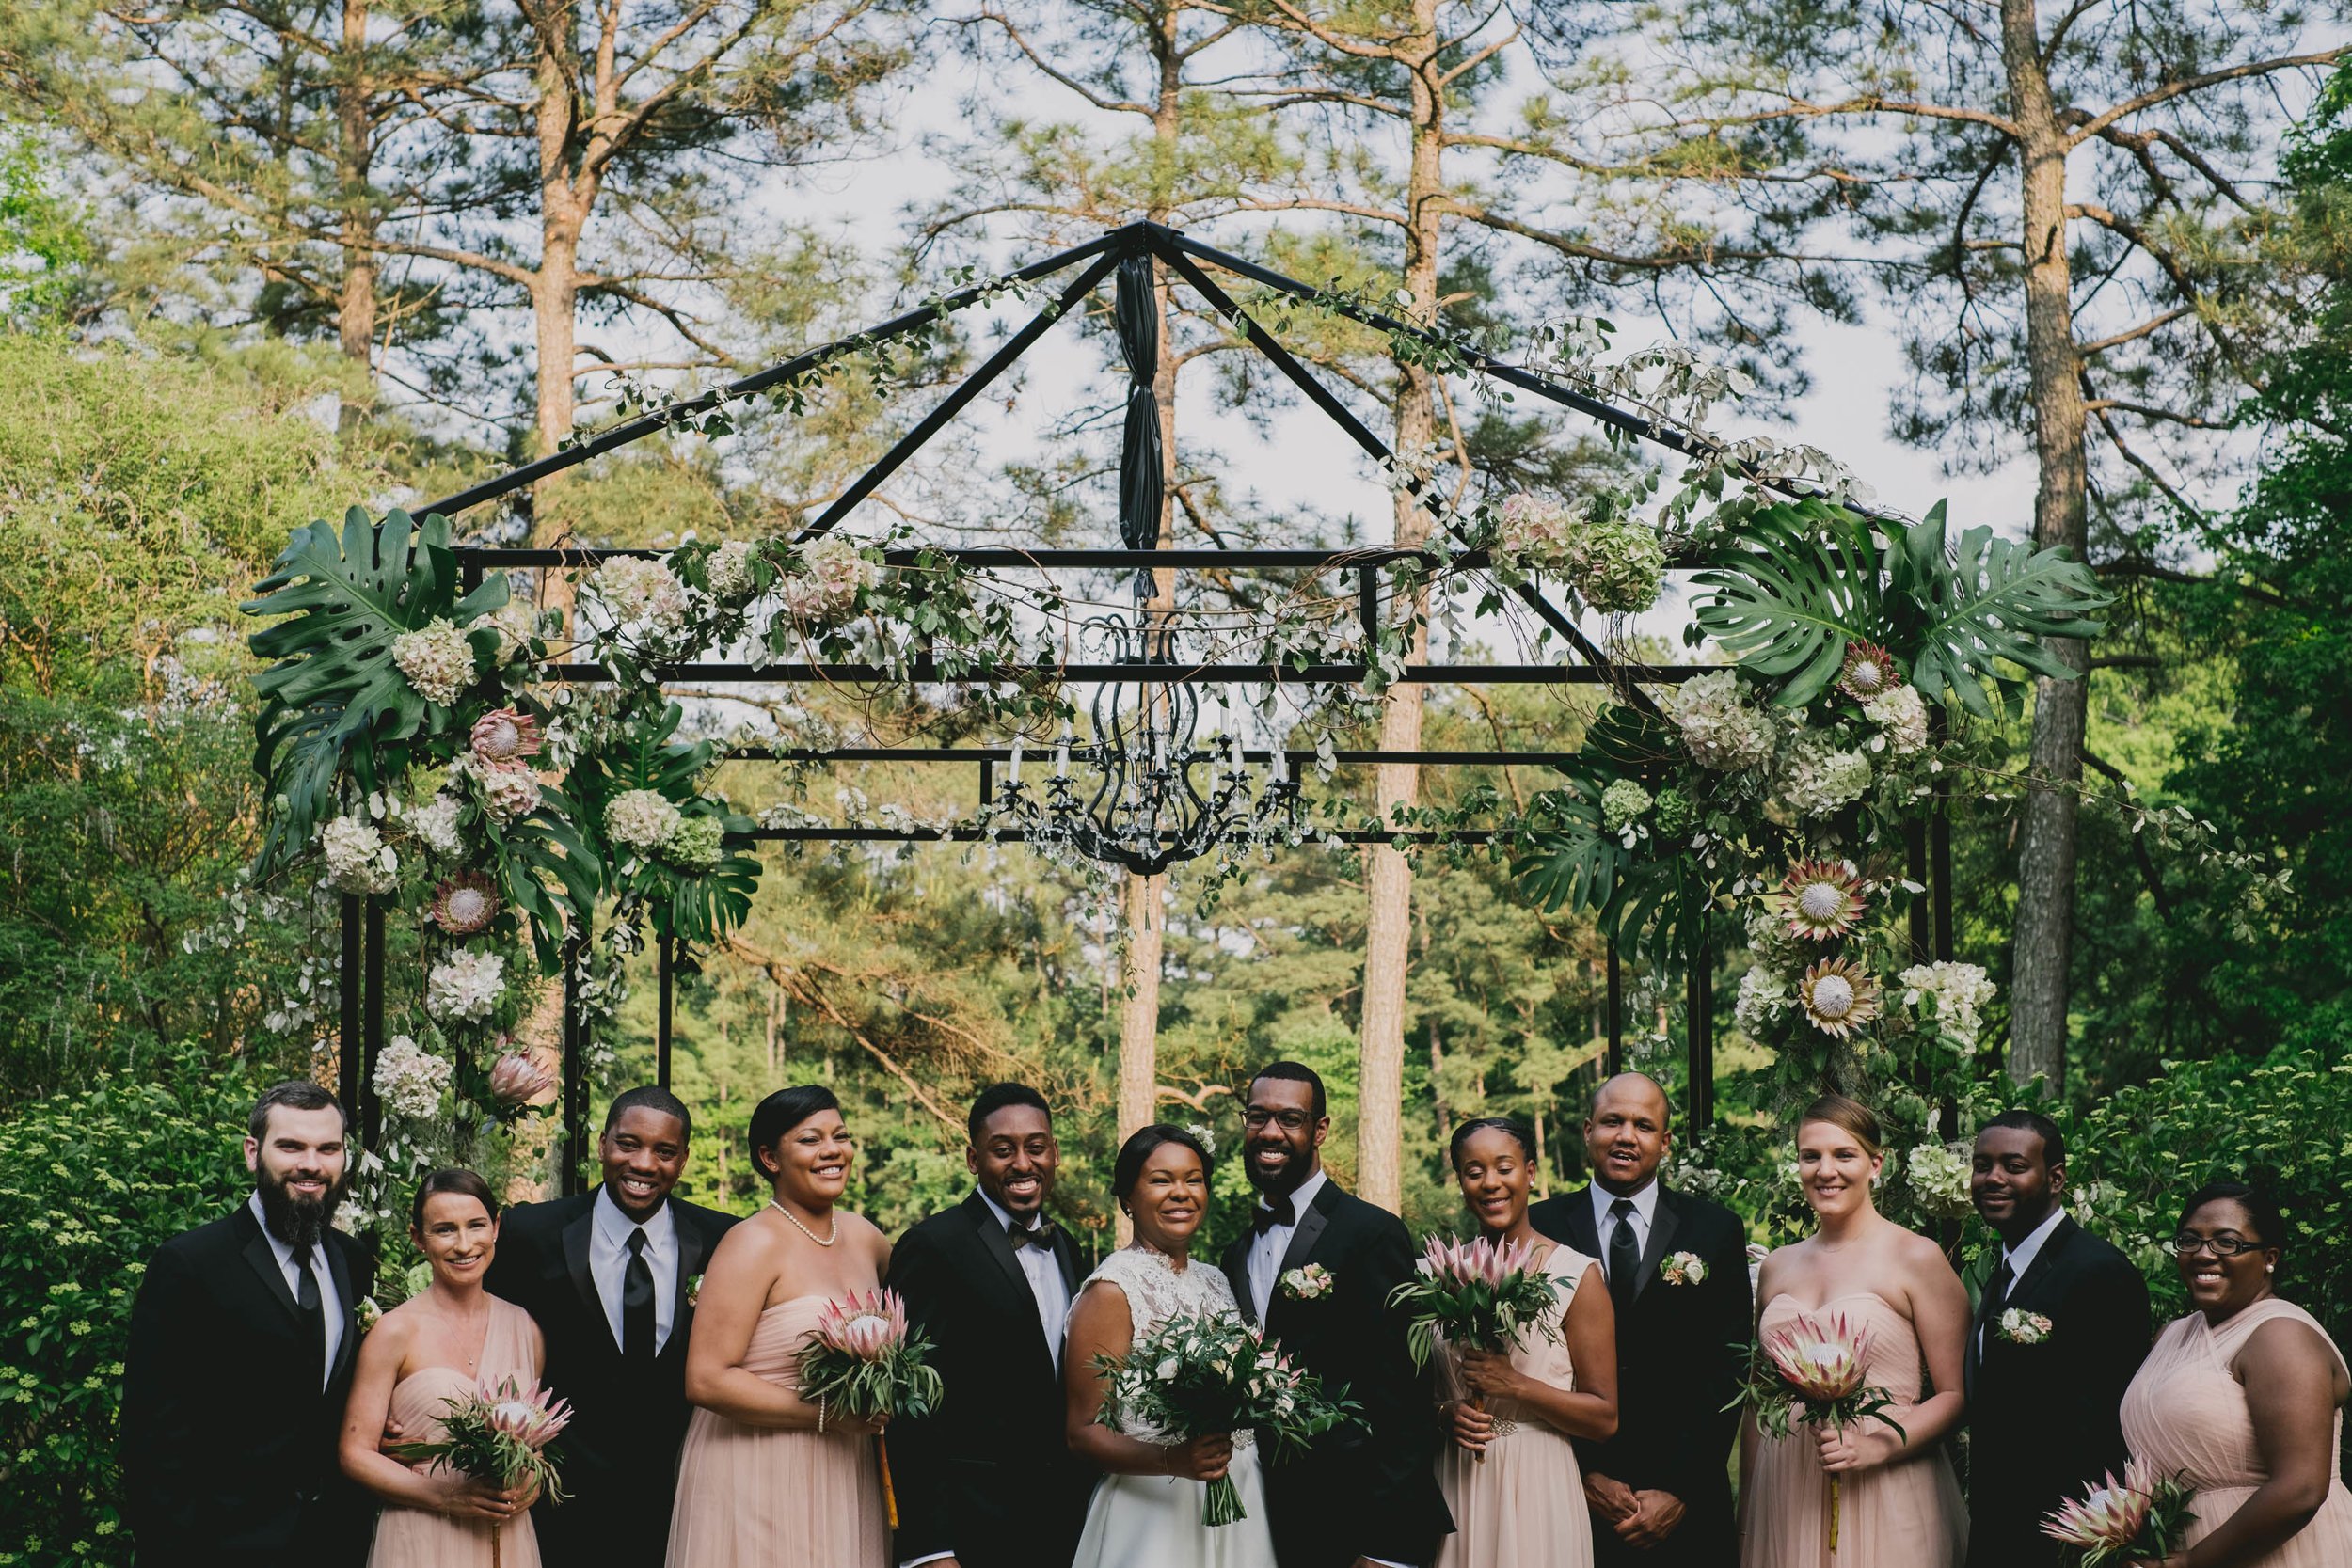 The wedding party of this elegant Umstead Hotel wedding